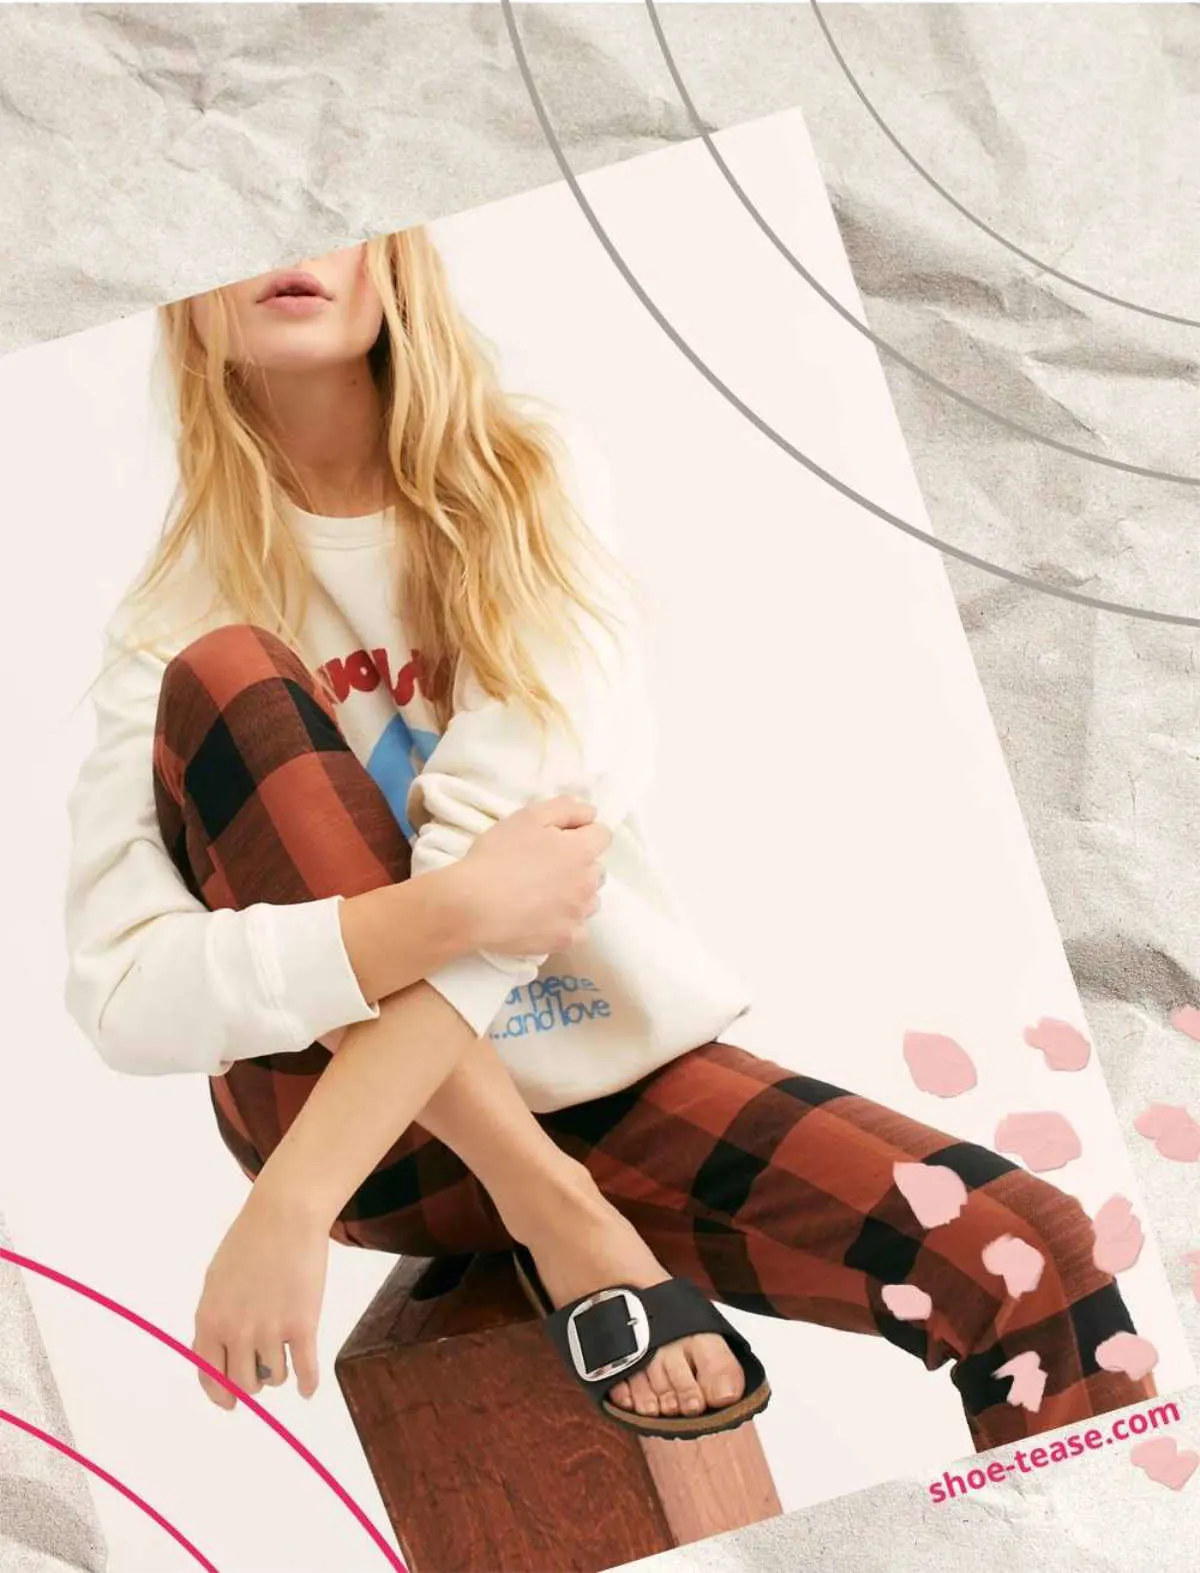 Collage of blonde woman wearing a Birkenstock outfit with red and black plaid pants and a white sweatshirt sitting on a stool.